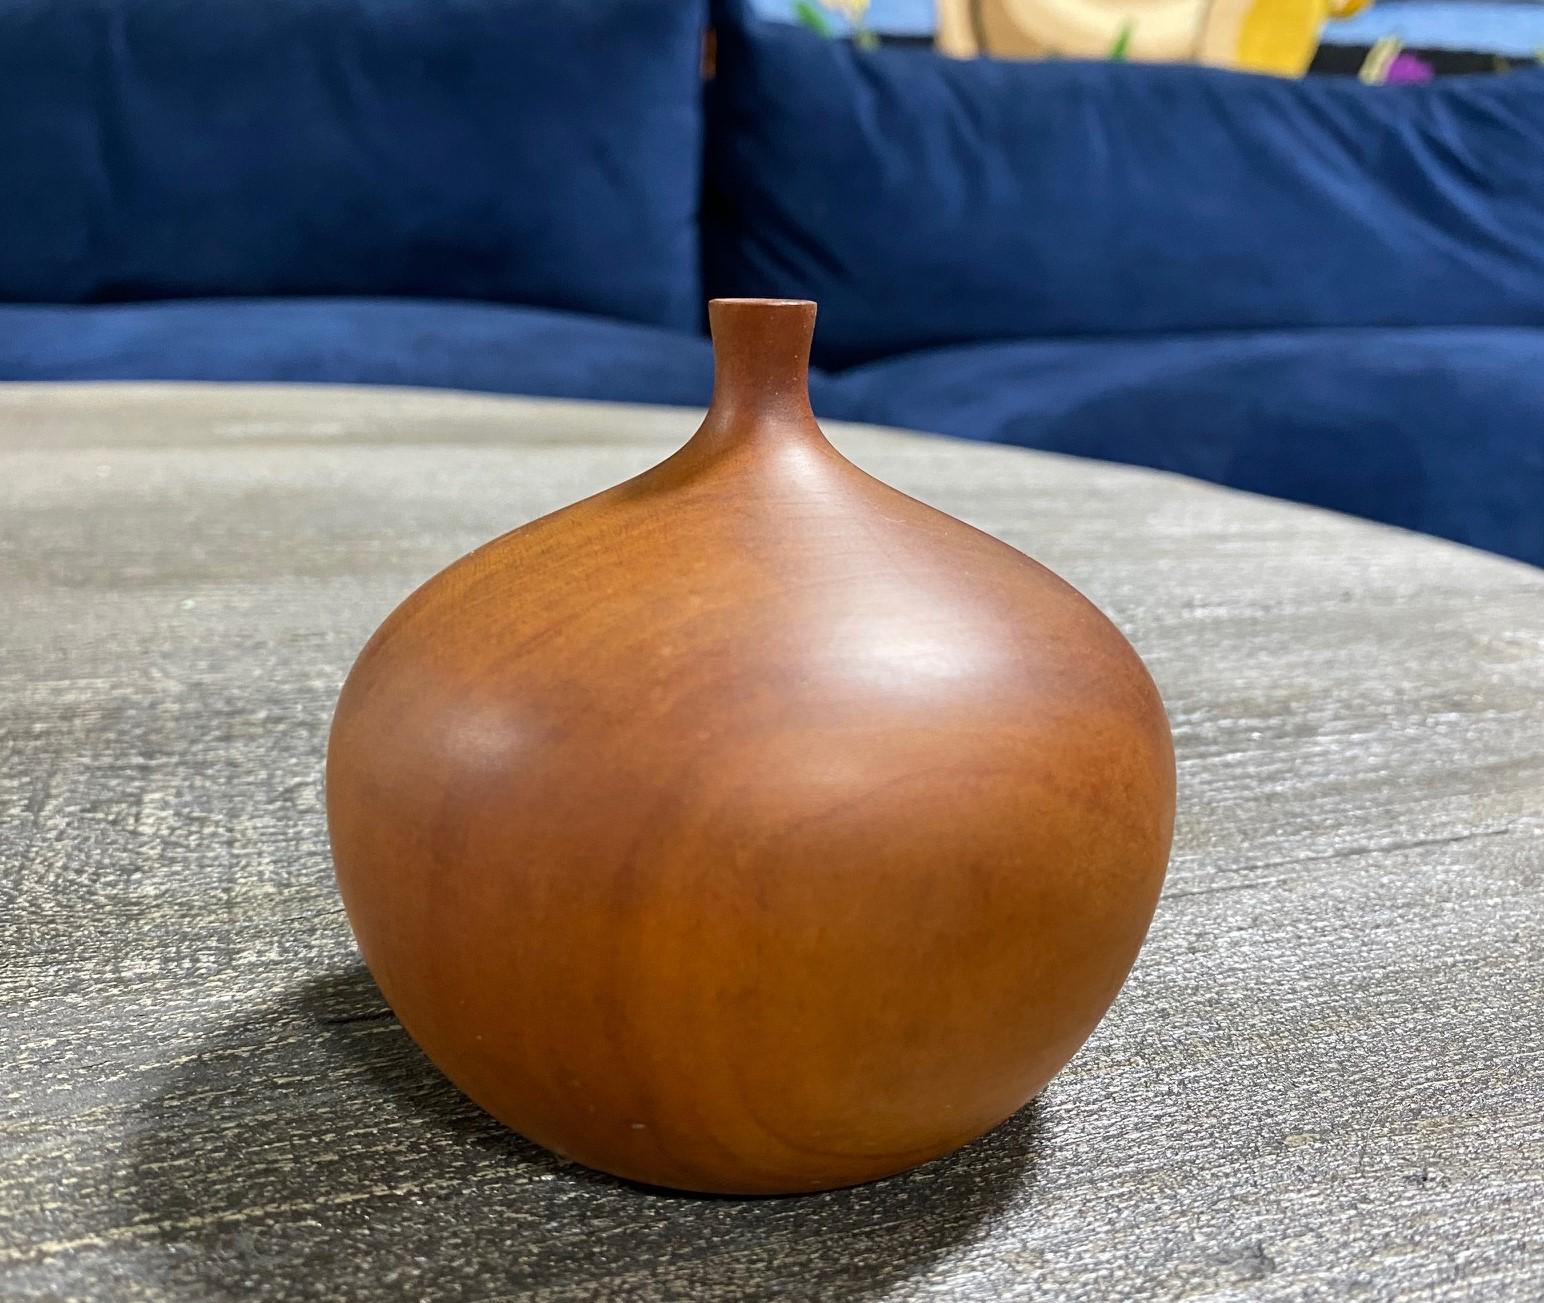 A beautifully executed, handmade, wood-turned vase by master woodturner Rude Osolnik who is widely regarded, along with Bob Stocksdale, as one of the finest woodturners in American woodturning history. In 1992, he was presented by then Kentucky